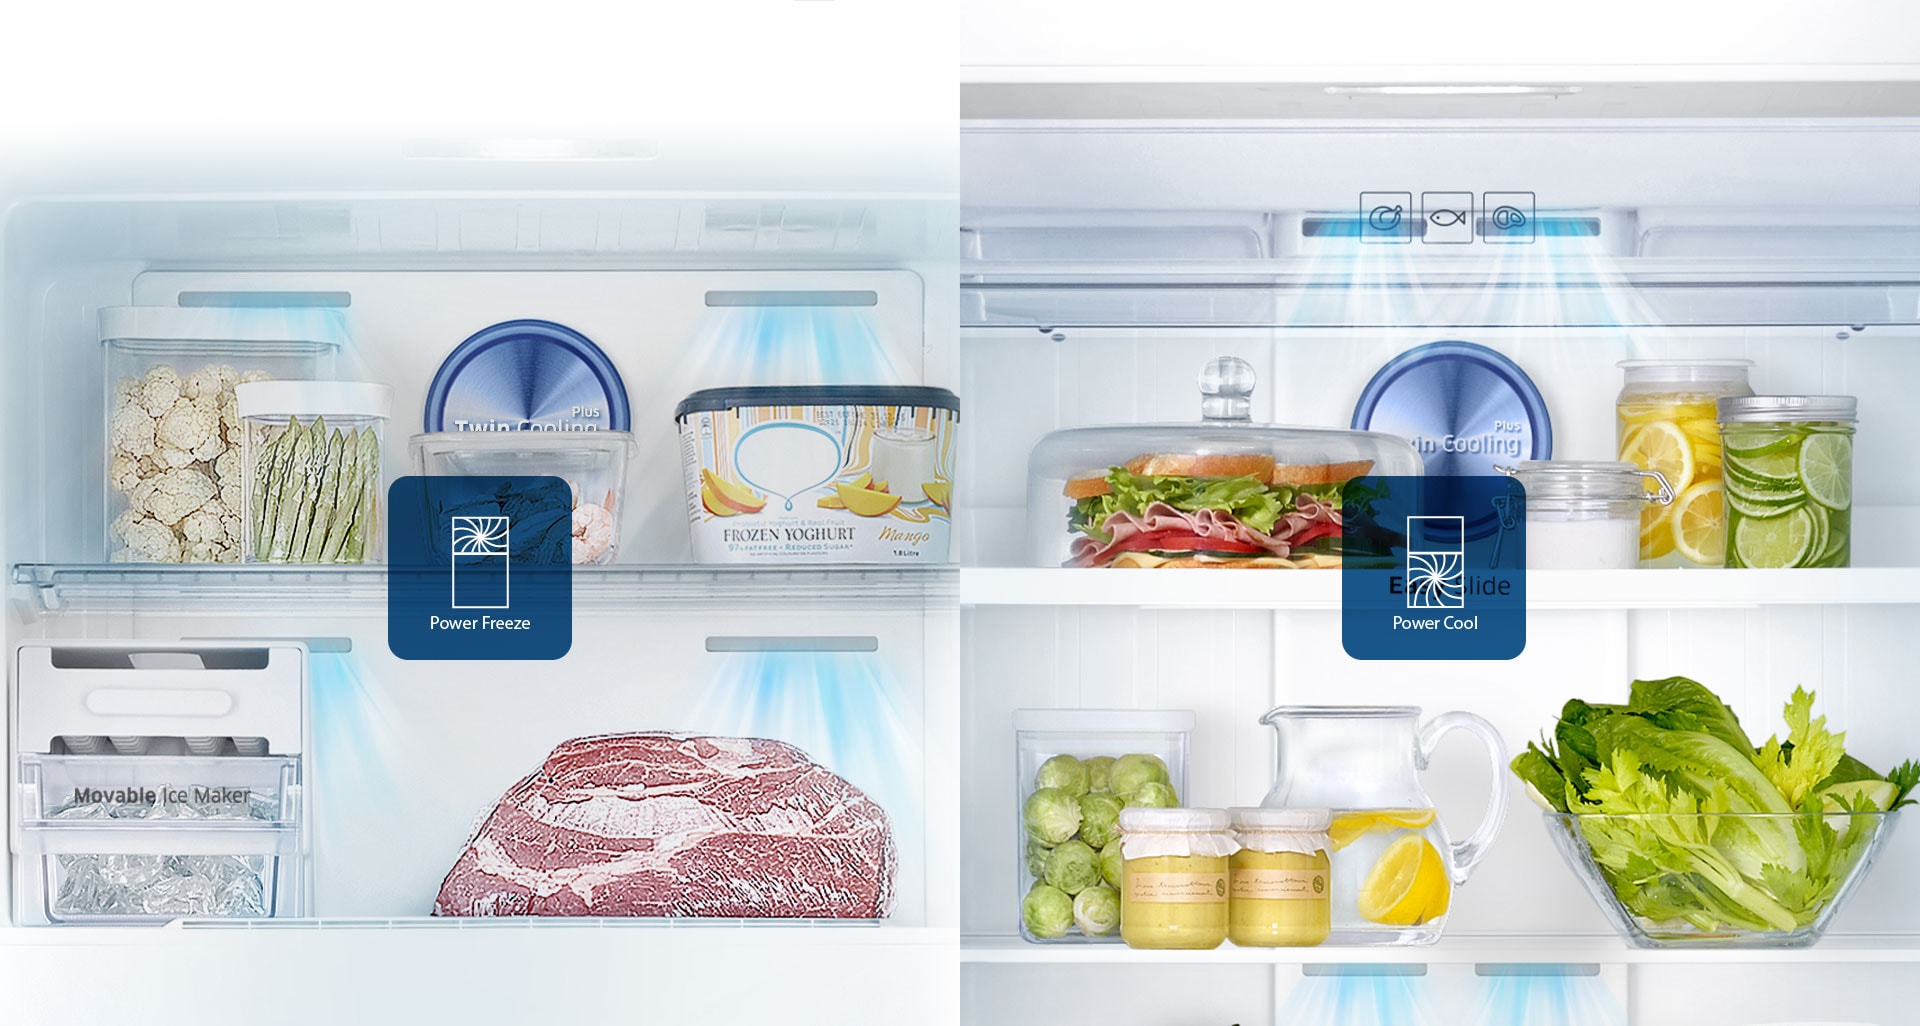 Samsung Twin Cooling Plus Top Freezer Fridge – an image showing Power Cool feature that creates ice and chills beverages rapidly